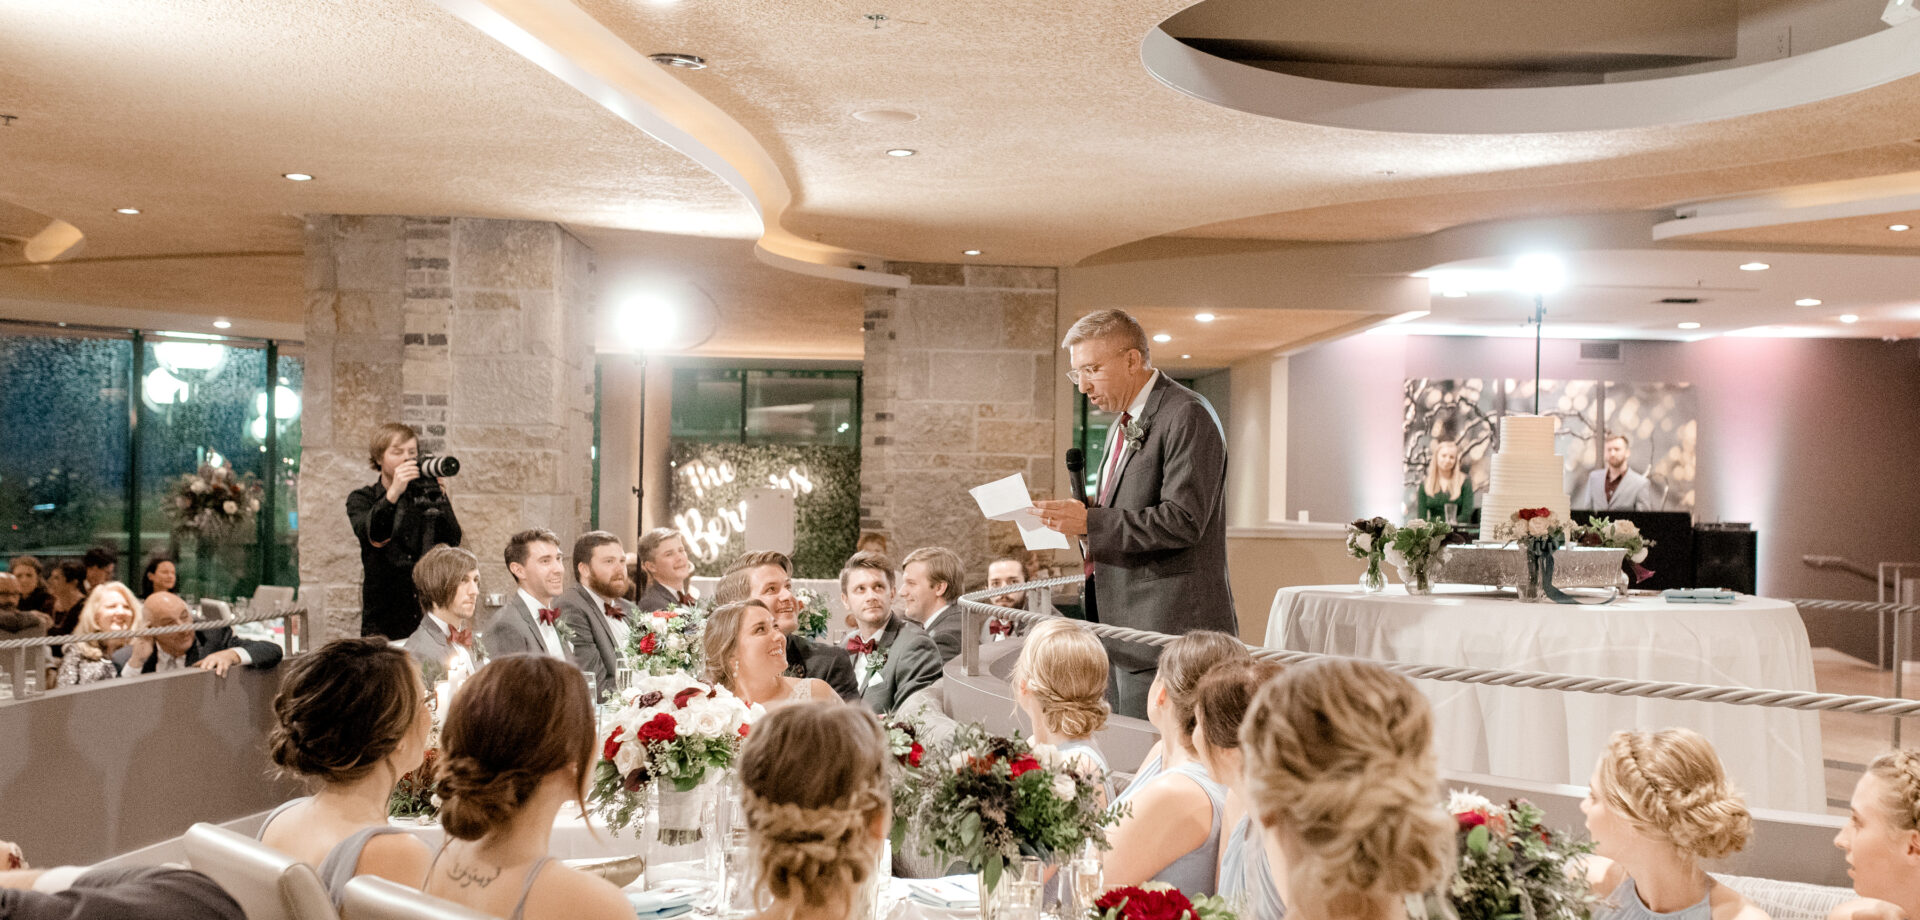 Father of the bride speech at wedding reception dinner